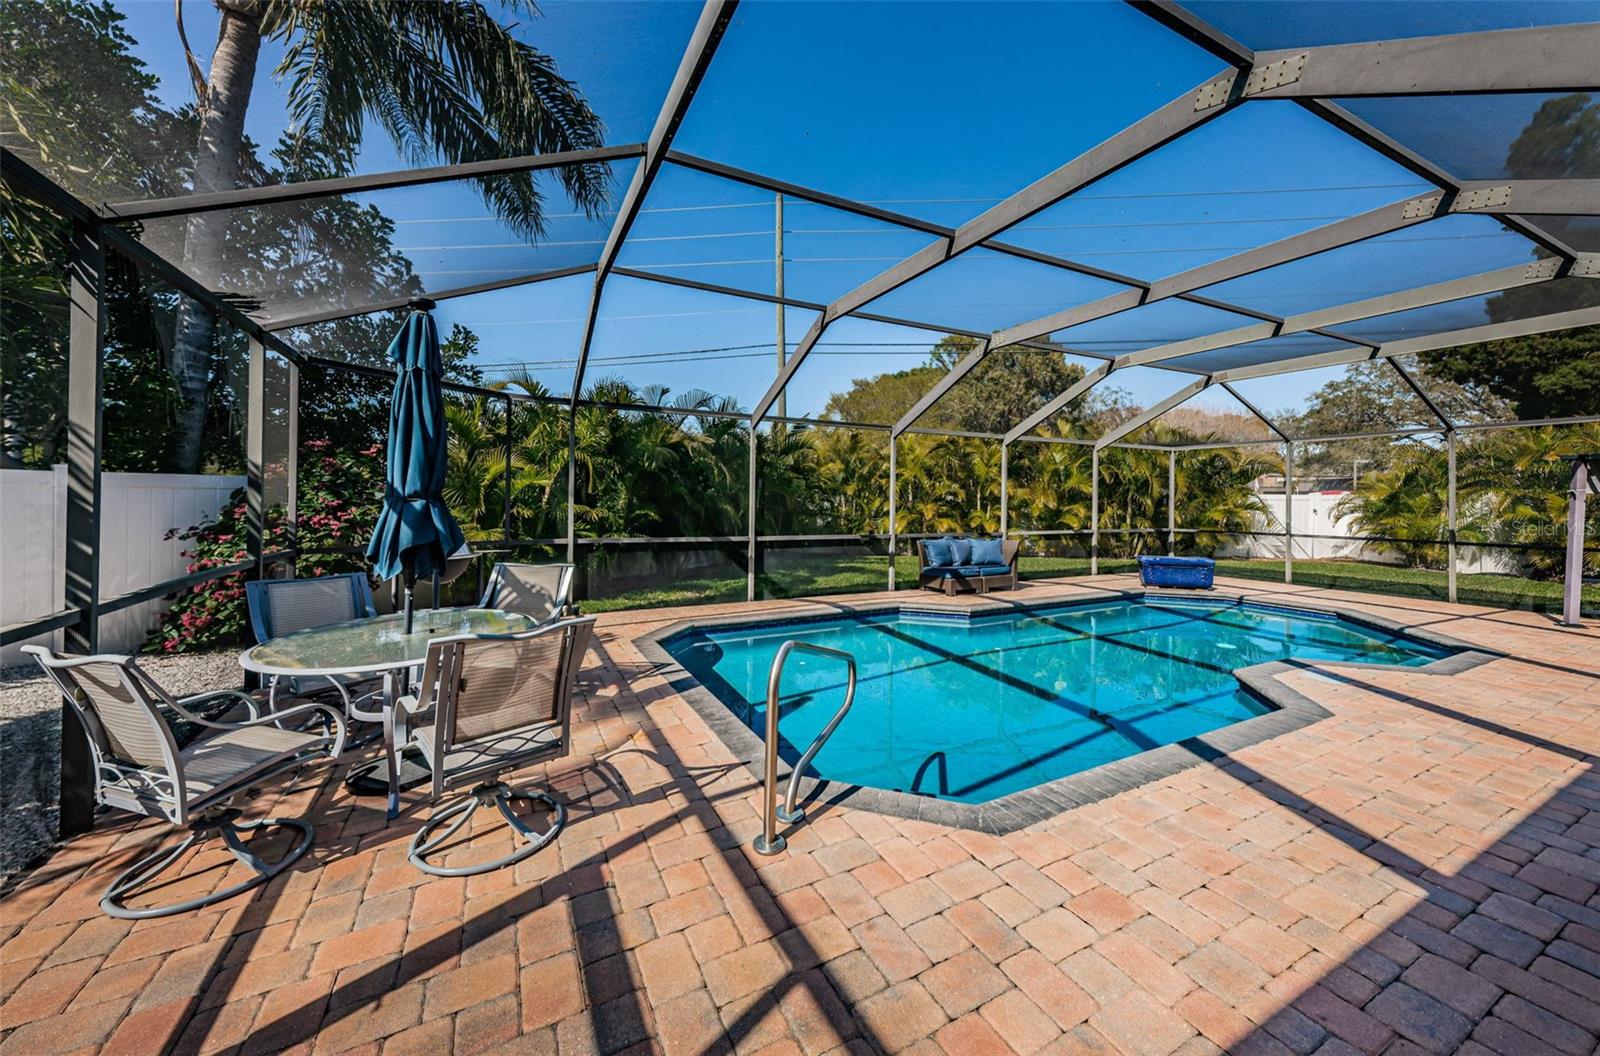 Entertain poolside with views of the yard